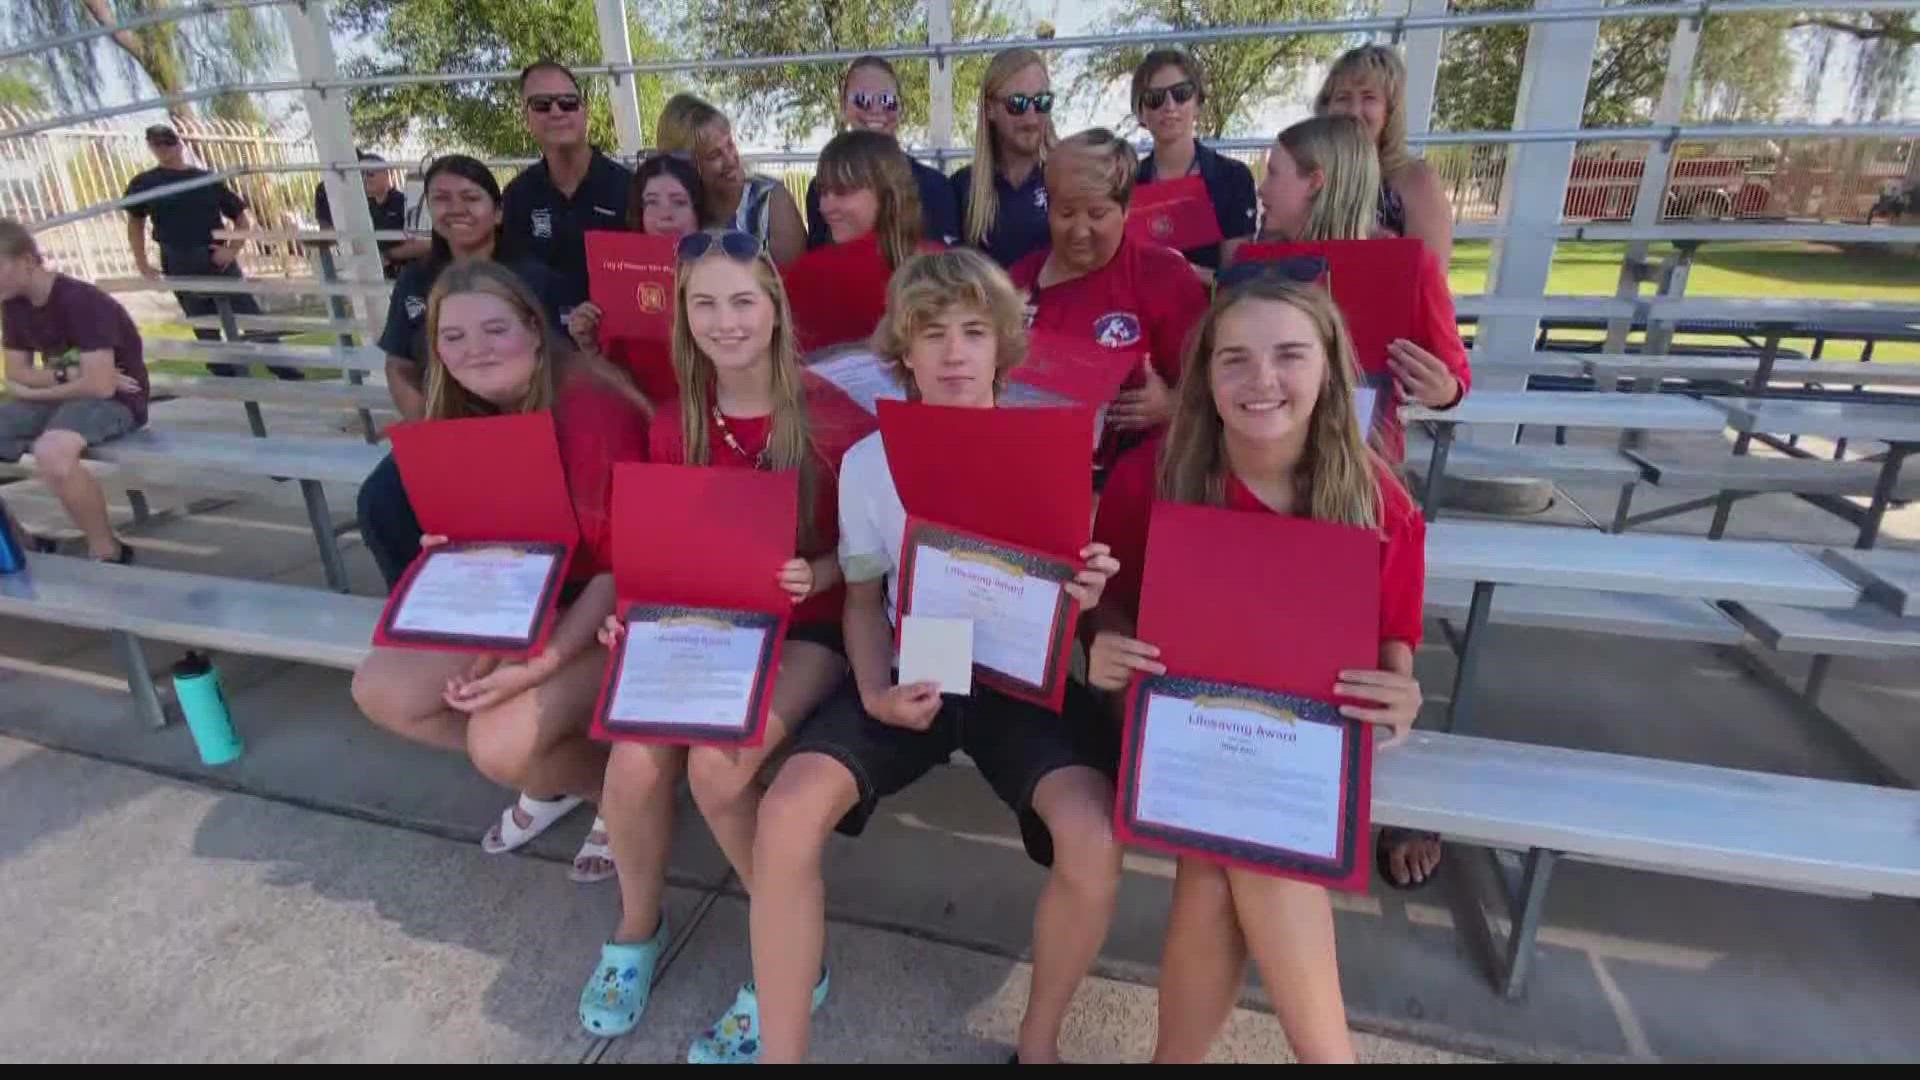 When a car crashed near a Phoenix public pool in late June, a group of teenage lifeguards sprang into action, going above and beyond the call of duty.